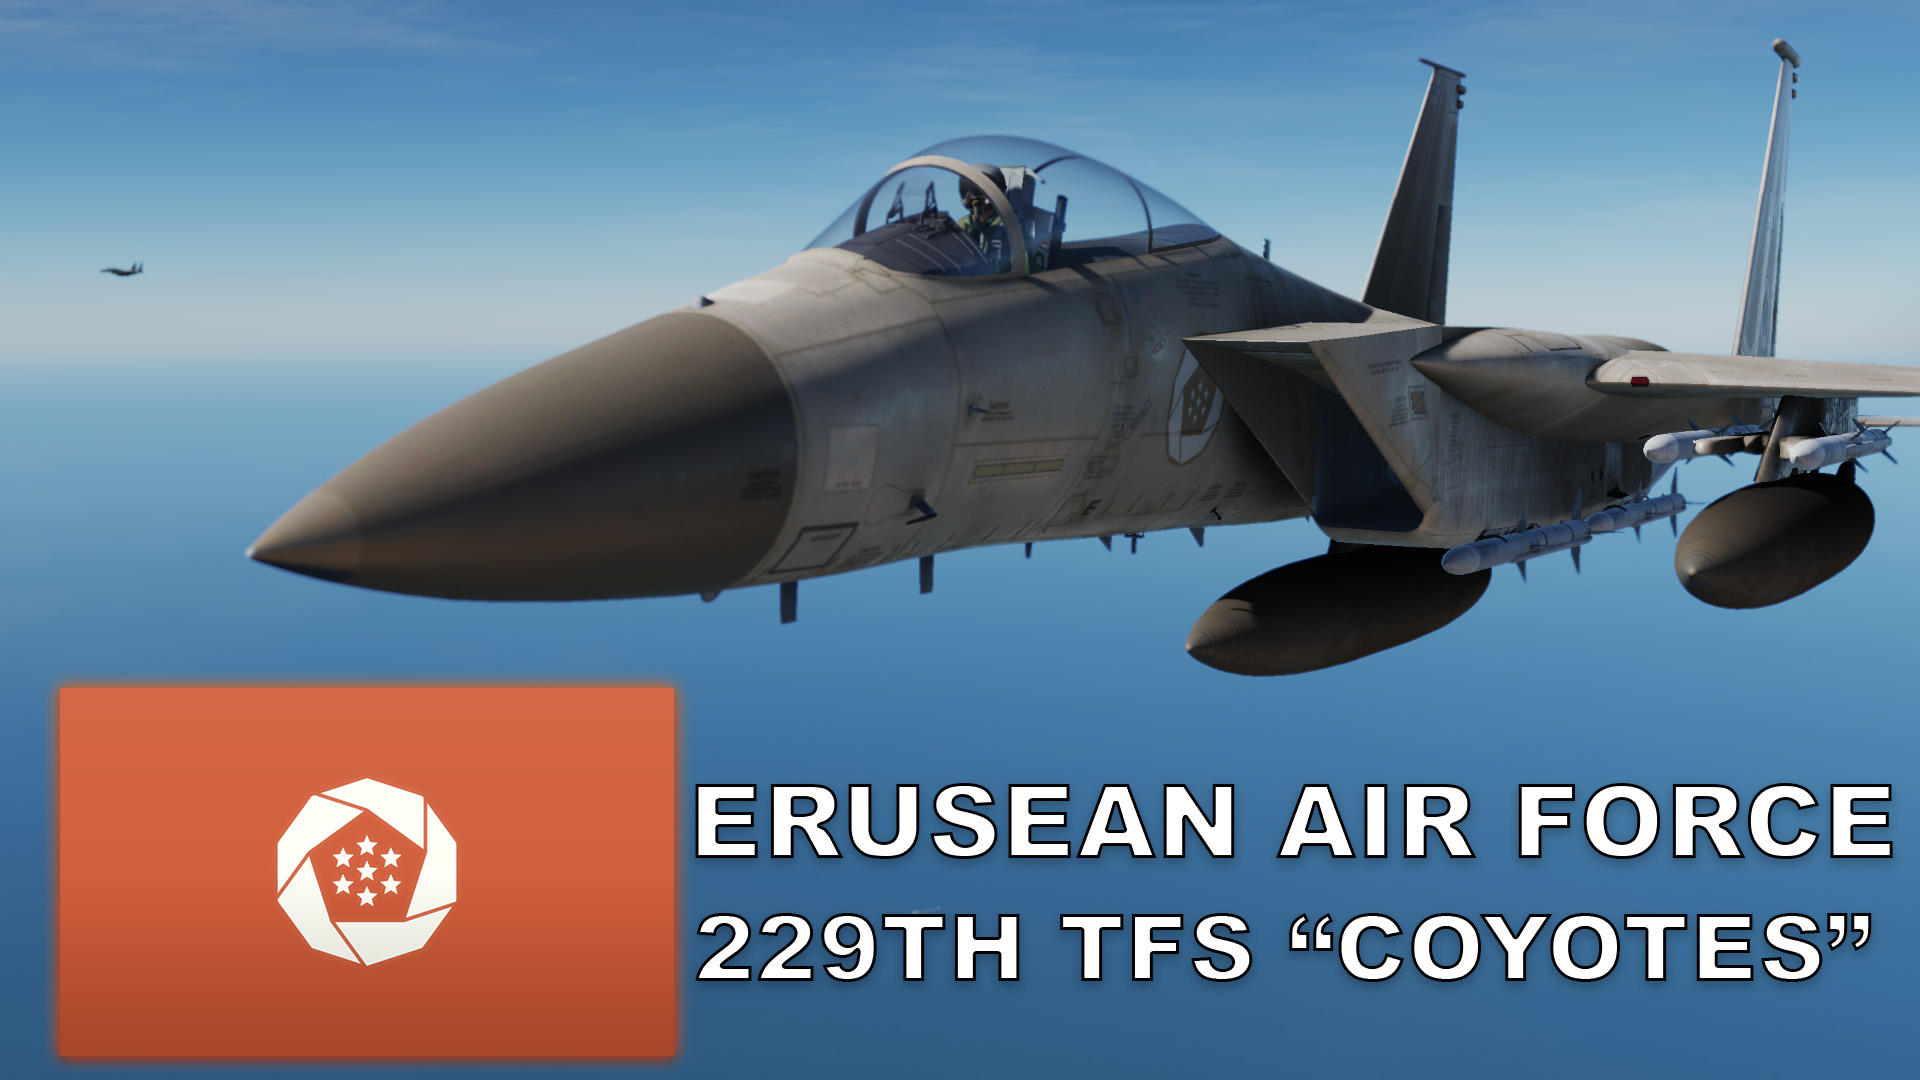 Ace Combat Erusean Air Force F-15C: 229th TFS "Coyotes"